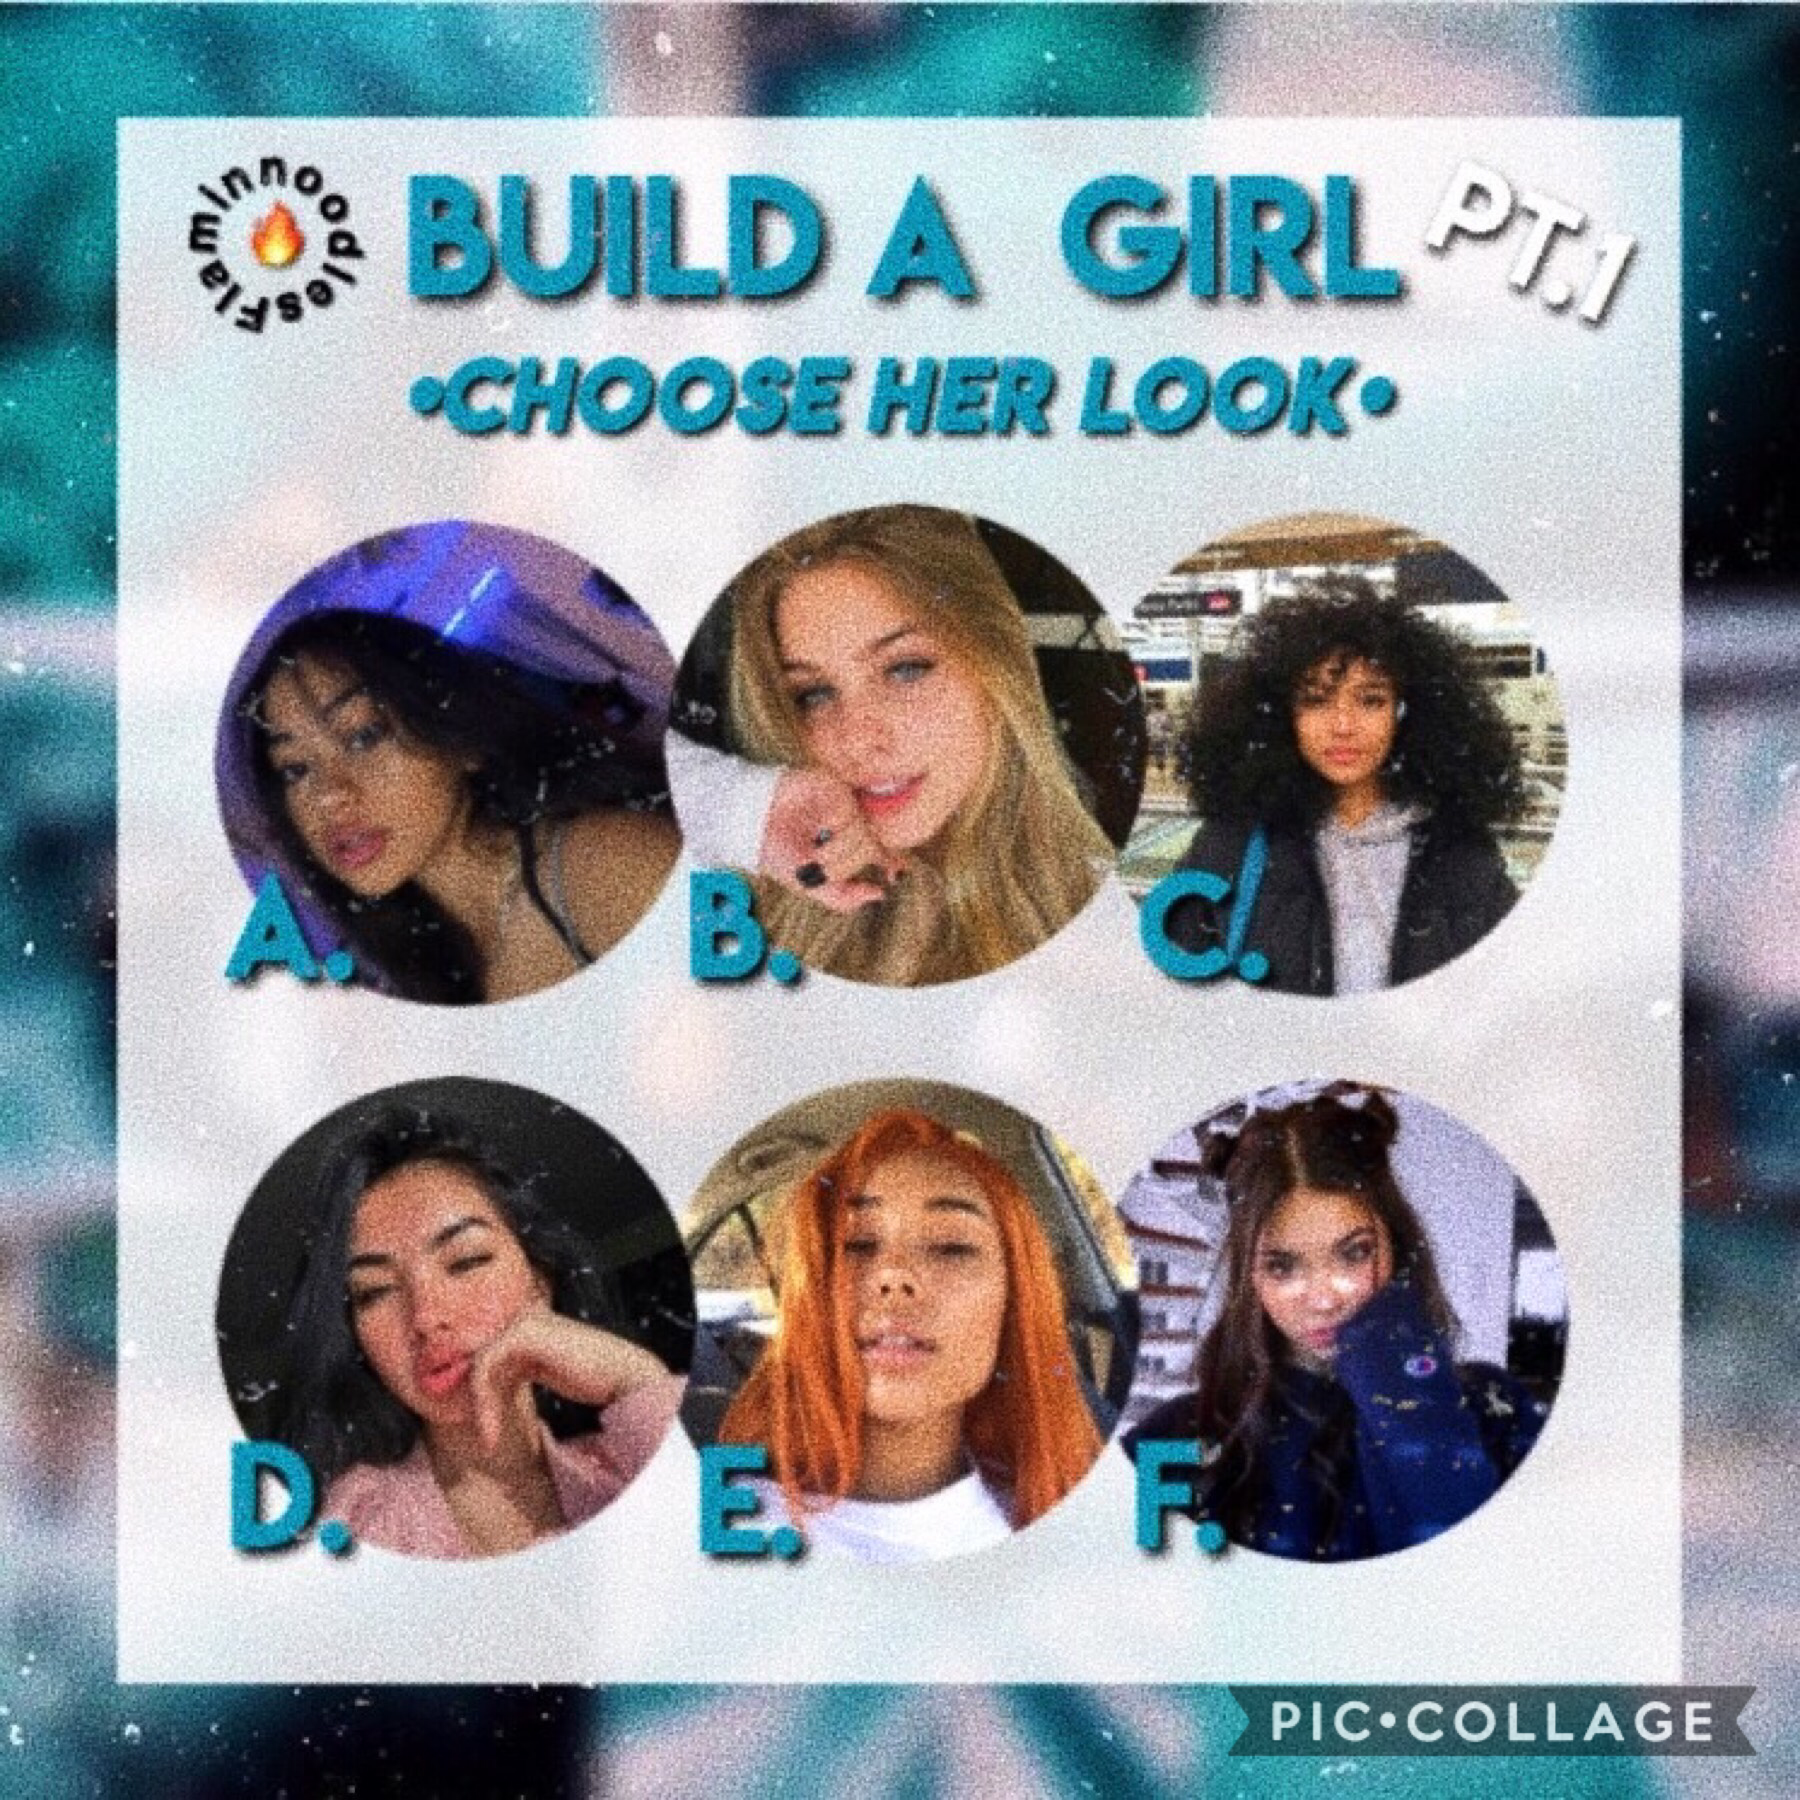 🤩 𝐓𝐚𝐩 🤩
Hellooo my beautiful ppl. I wasn’t able to post last week bc I was sick but I’m feeling much better now! 
• Build A Girl •
It’s only pt.1 so stay tuned...😏
𝐐𝐨𝐭𝐝: 𝑊ℎ𝑒𝑛’𝑠 𝑦𝑜𝑢𝑟 𝑏𝑖𝑟𝑡ℎ𝑑𝑎𝑦
